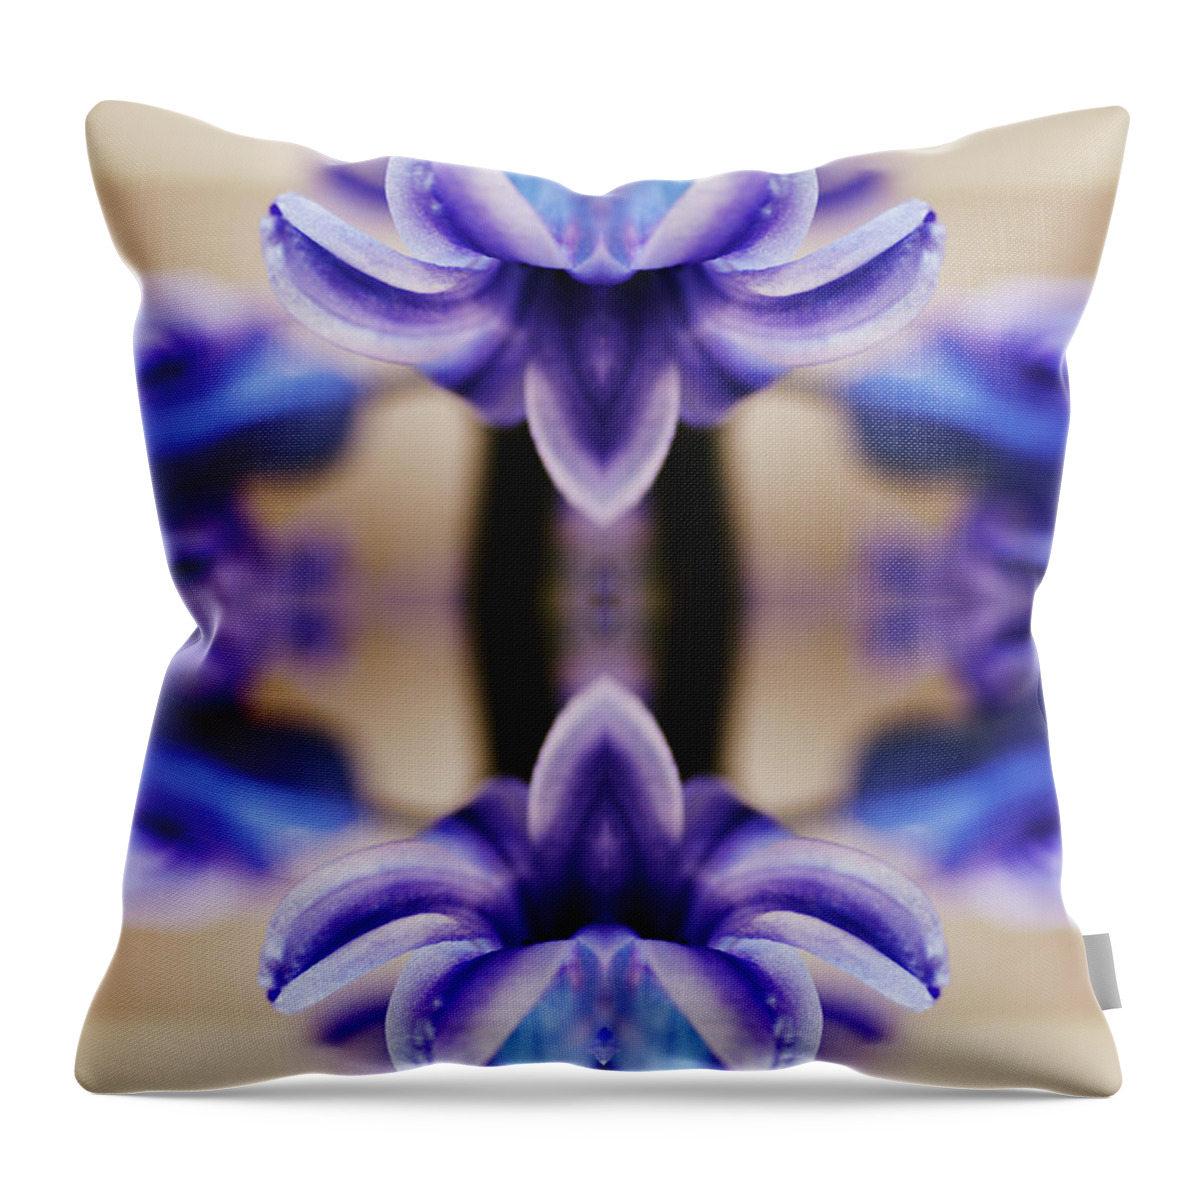 Purple Throw Pillow featuring the photograph Hyazinth by Silvia Otte